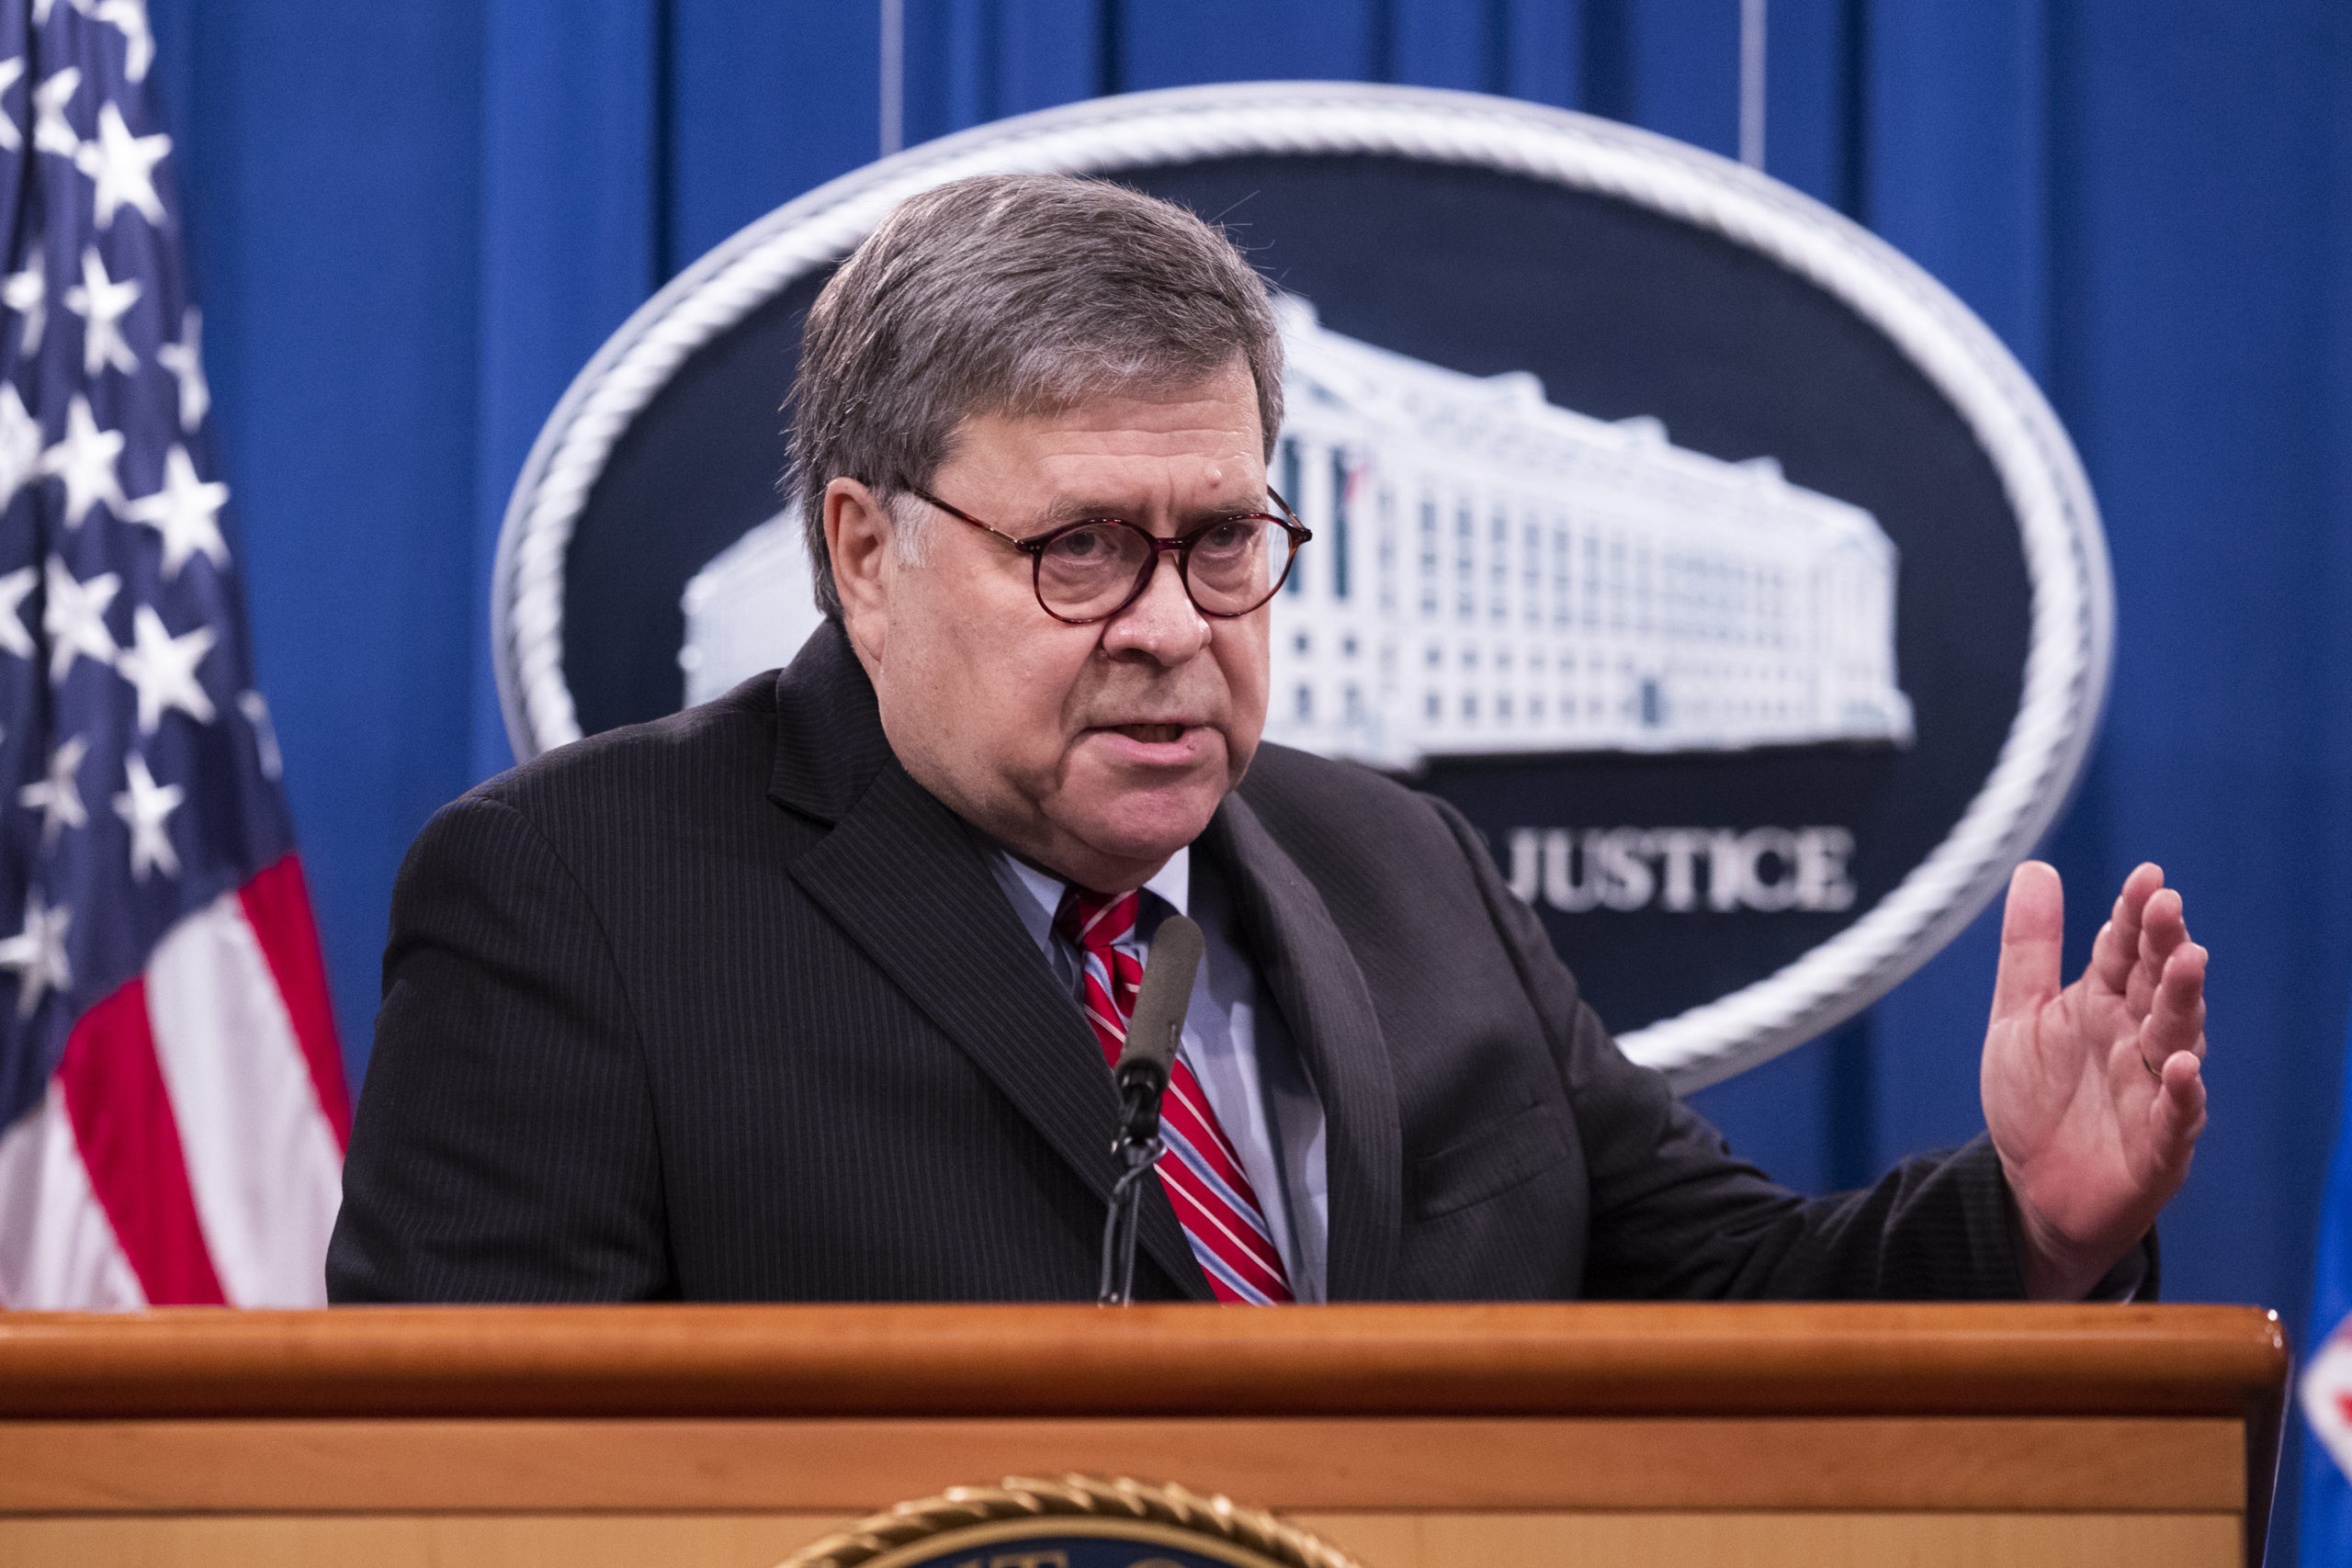 WASHINGTON, DC - DECEMBER 21: US Attorney General Bill Barr holds a news conference to provide an update on the investigation of the terrorist bombing of Pan Am flight 103 on the 32nd anniversary of the attack, at the Department of Justice December 21, 2020 in Washington, DC. Barr announced criminal charges against one of the alleged Libyan bombmakers. The bombing occurred on December 21, 1988, killing all 259 people on board and eleven on the ground in Lockerbie, Scotland. (Photo by Michael Reynolds-Pool/Getty Images)